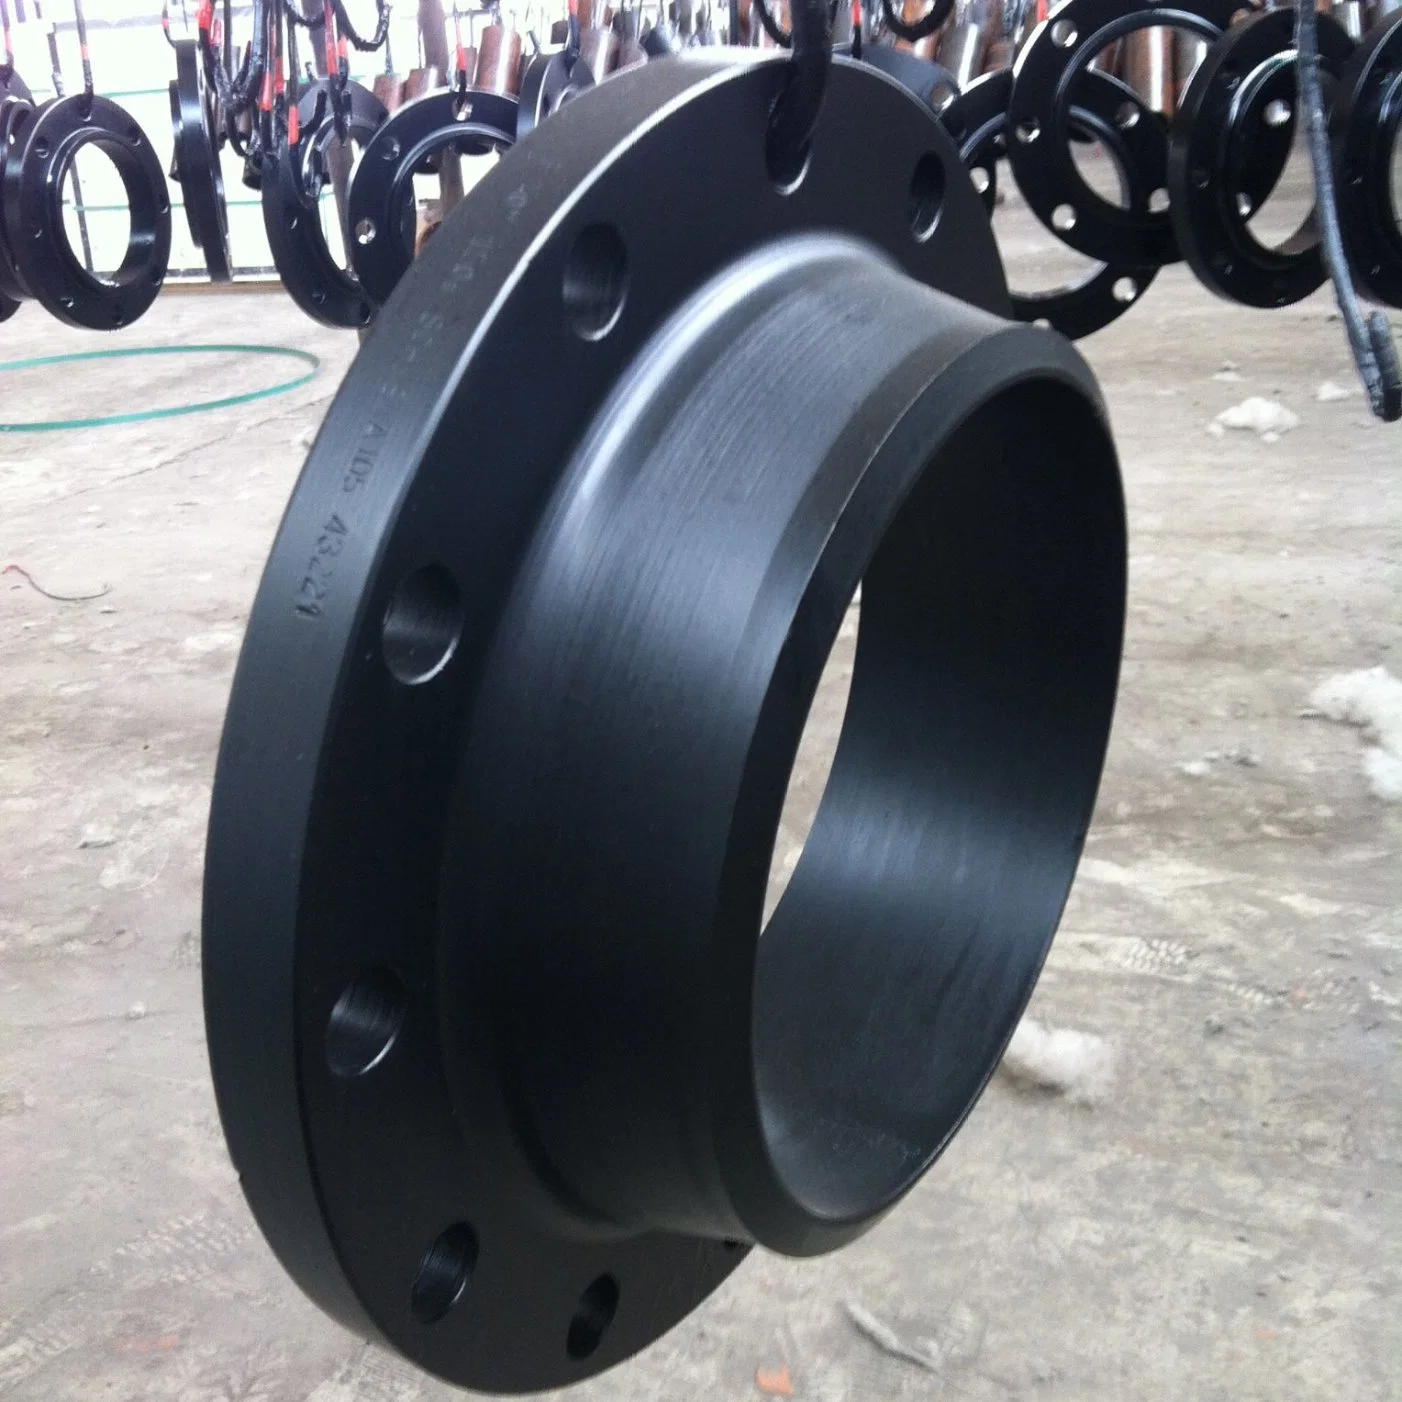 Experienced Carbon Steel Welding Neck Flanges Manufacturers